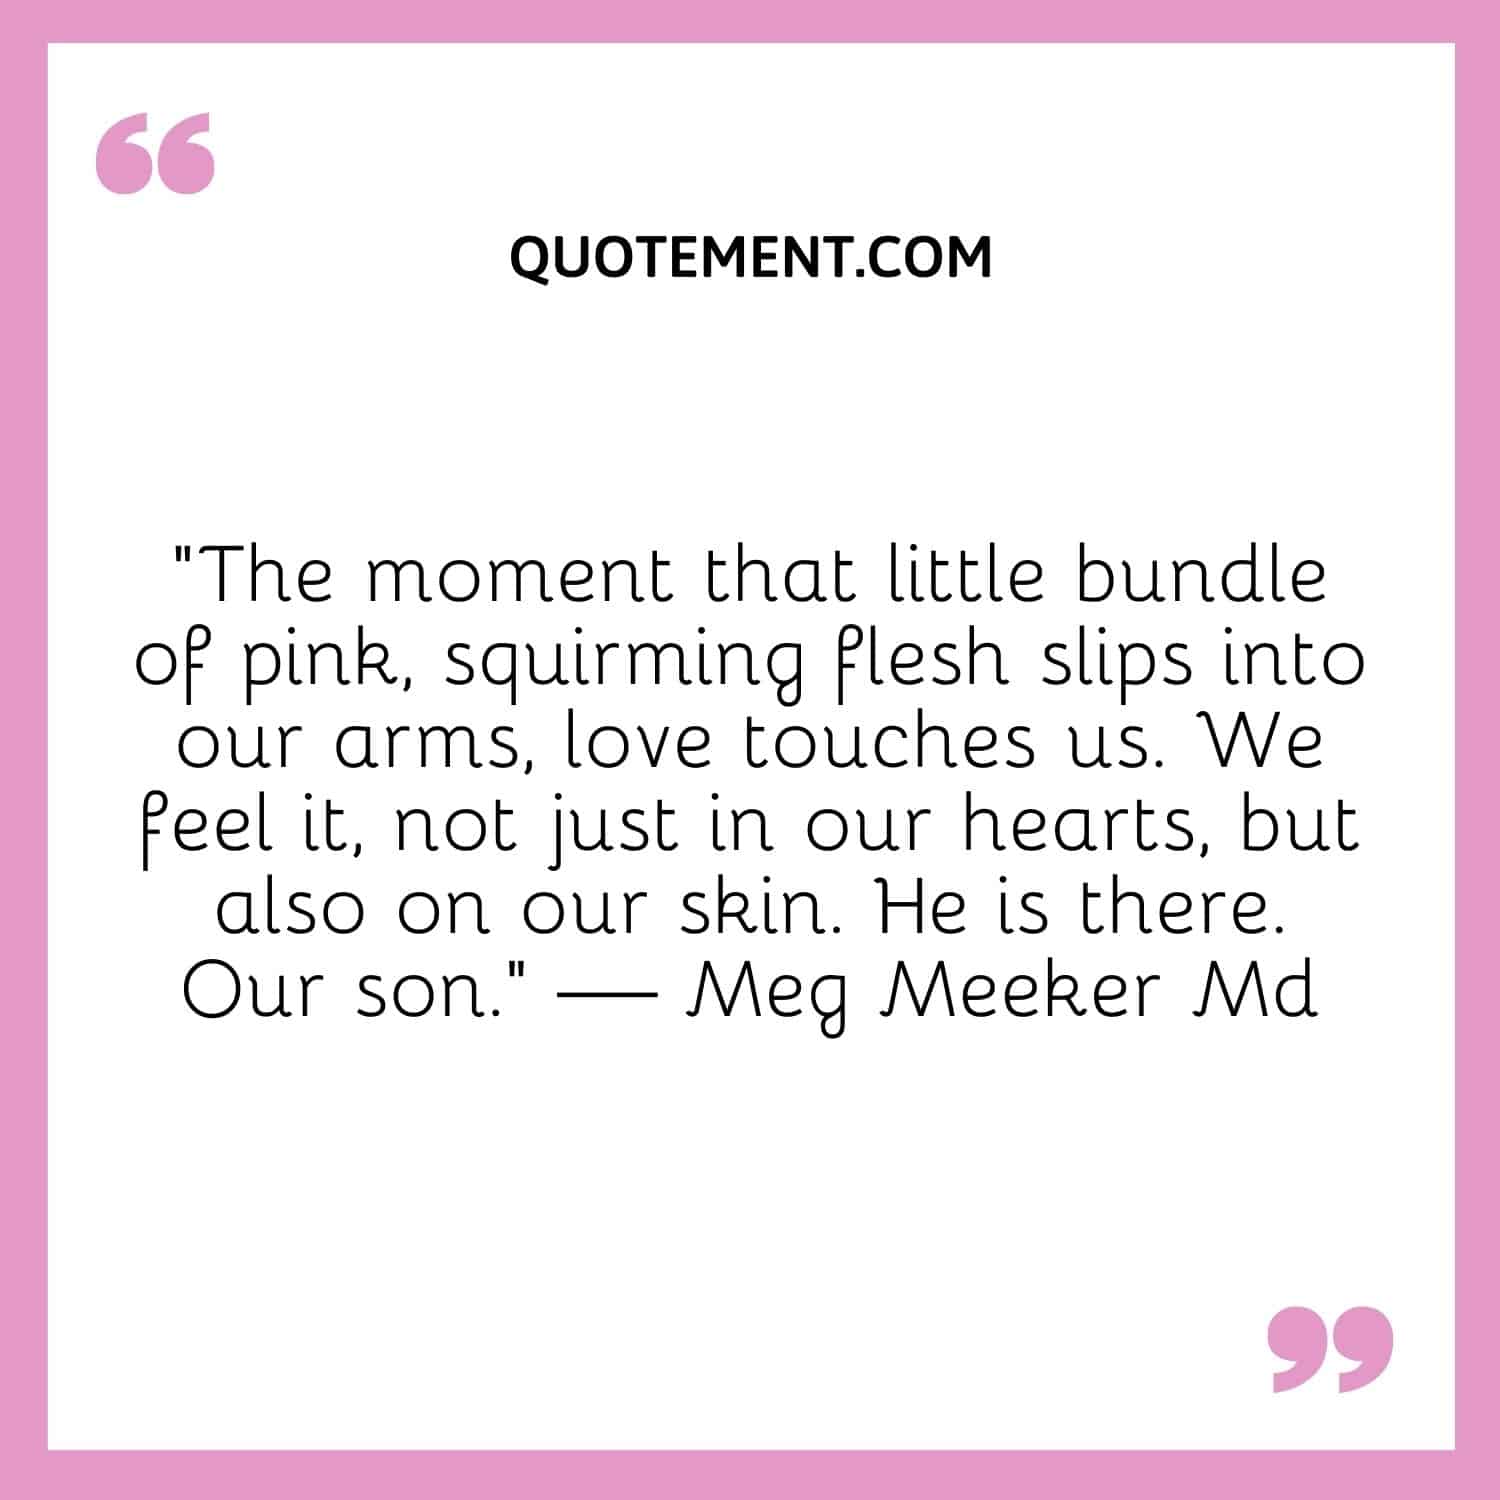 The moment that little bundle of pink, squirming flesh slips into our arms, love touches us.